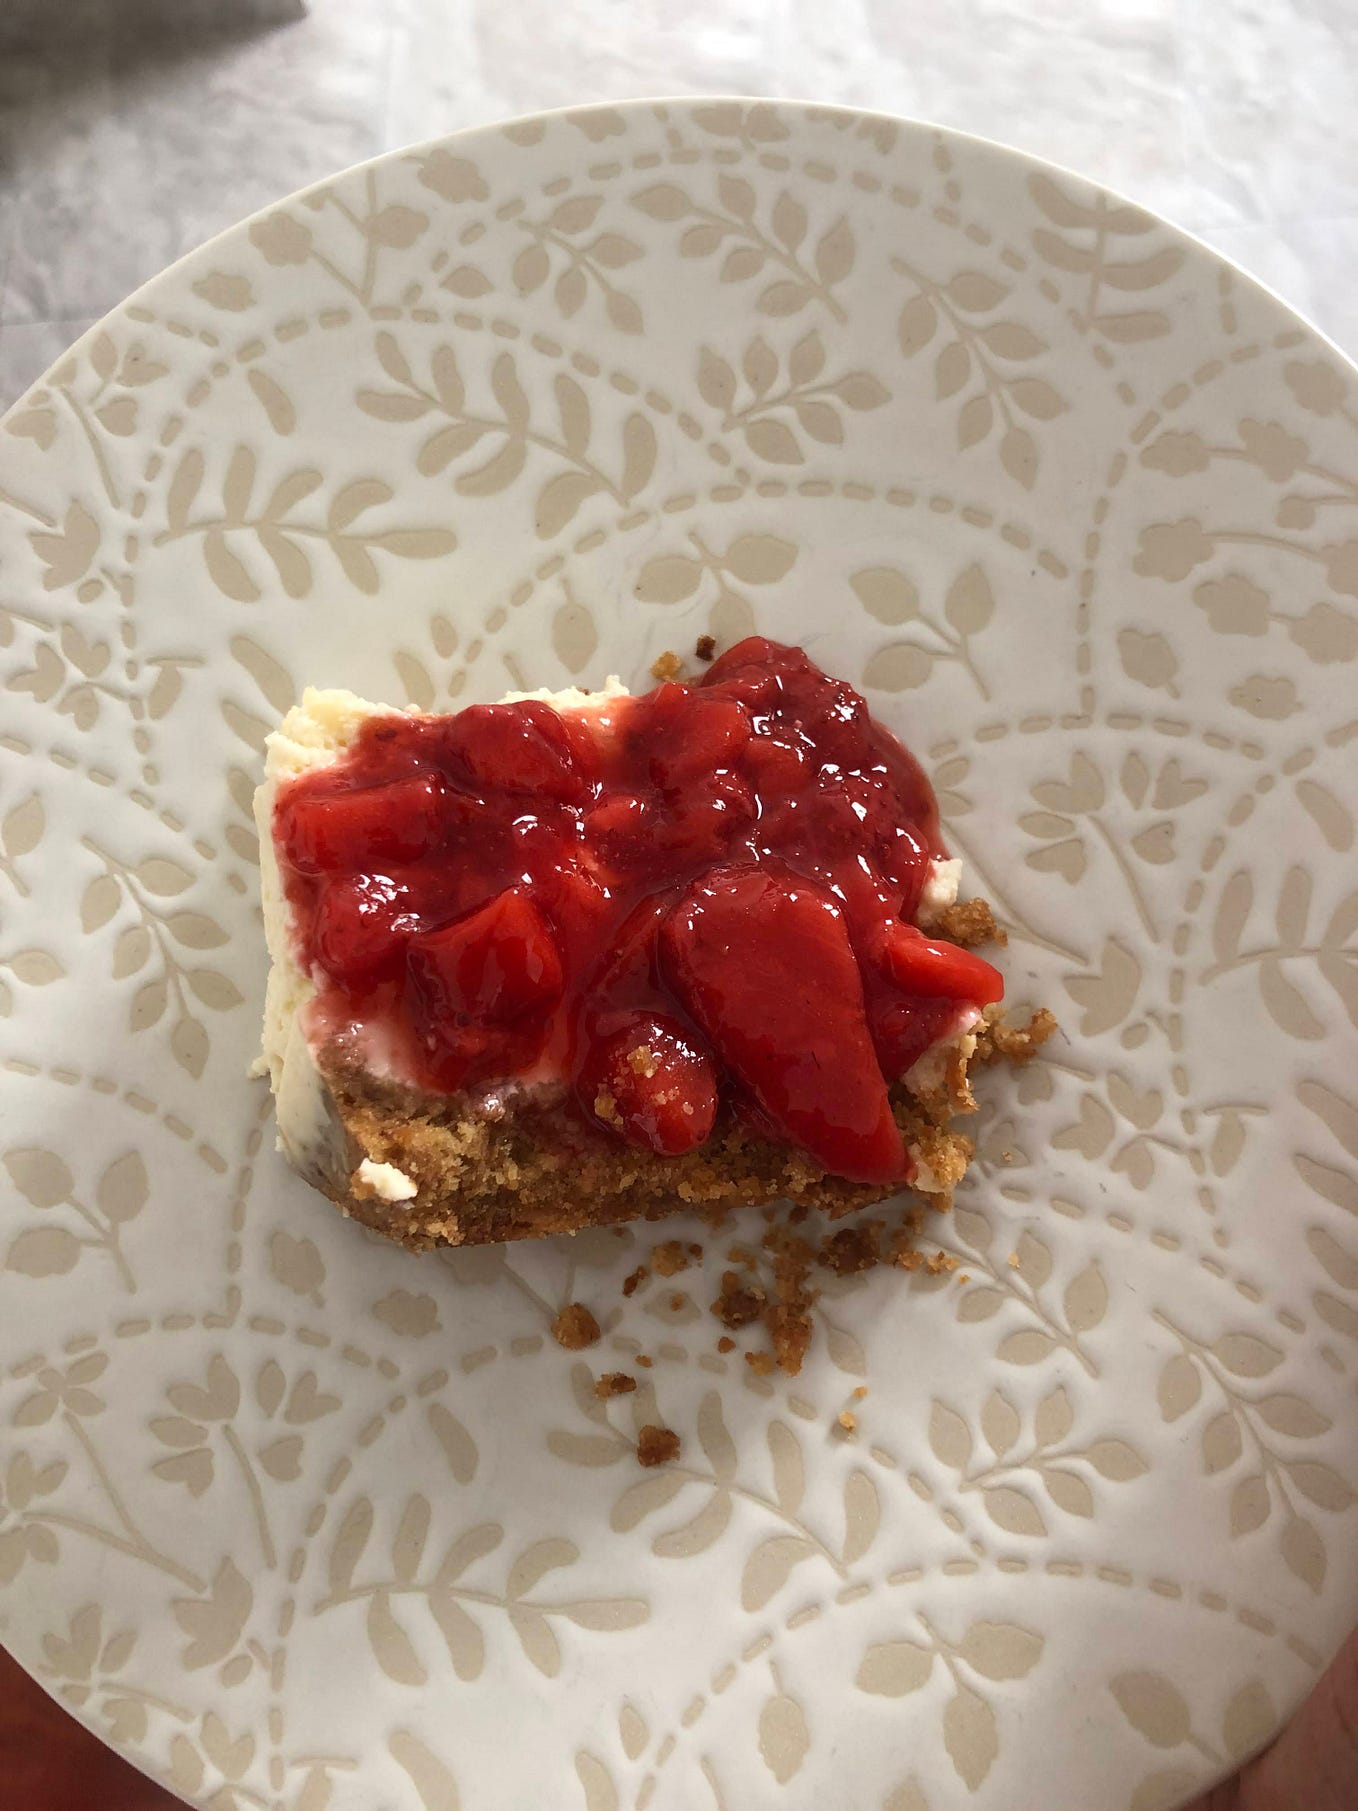 a slice of strawberry cheesecake with a strawberry compote on a floral patterned plate.